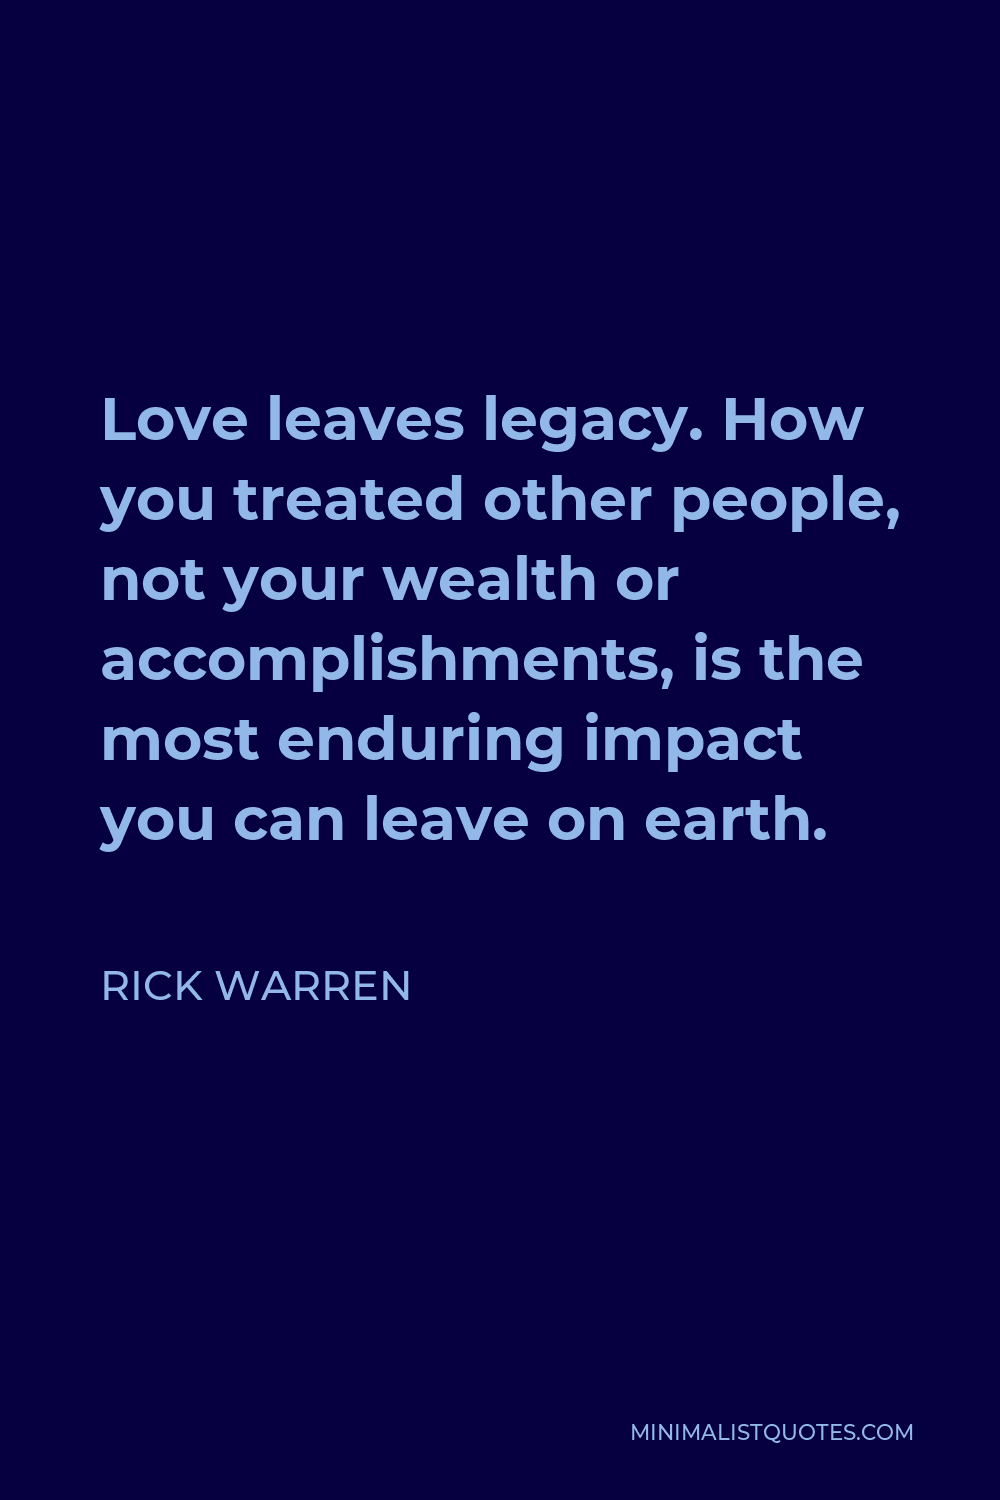 Love Quote: Love Leaves a Legacy by Rick Warren